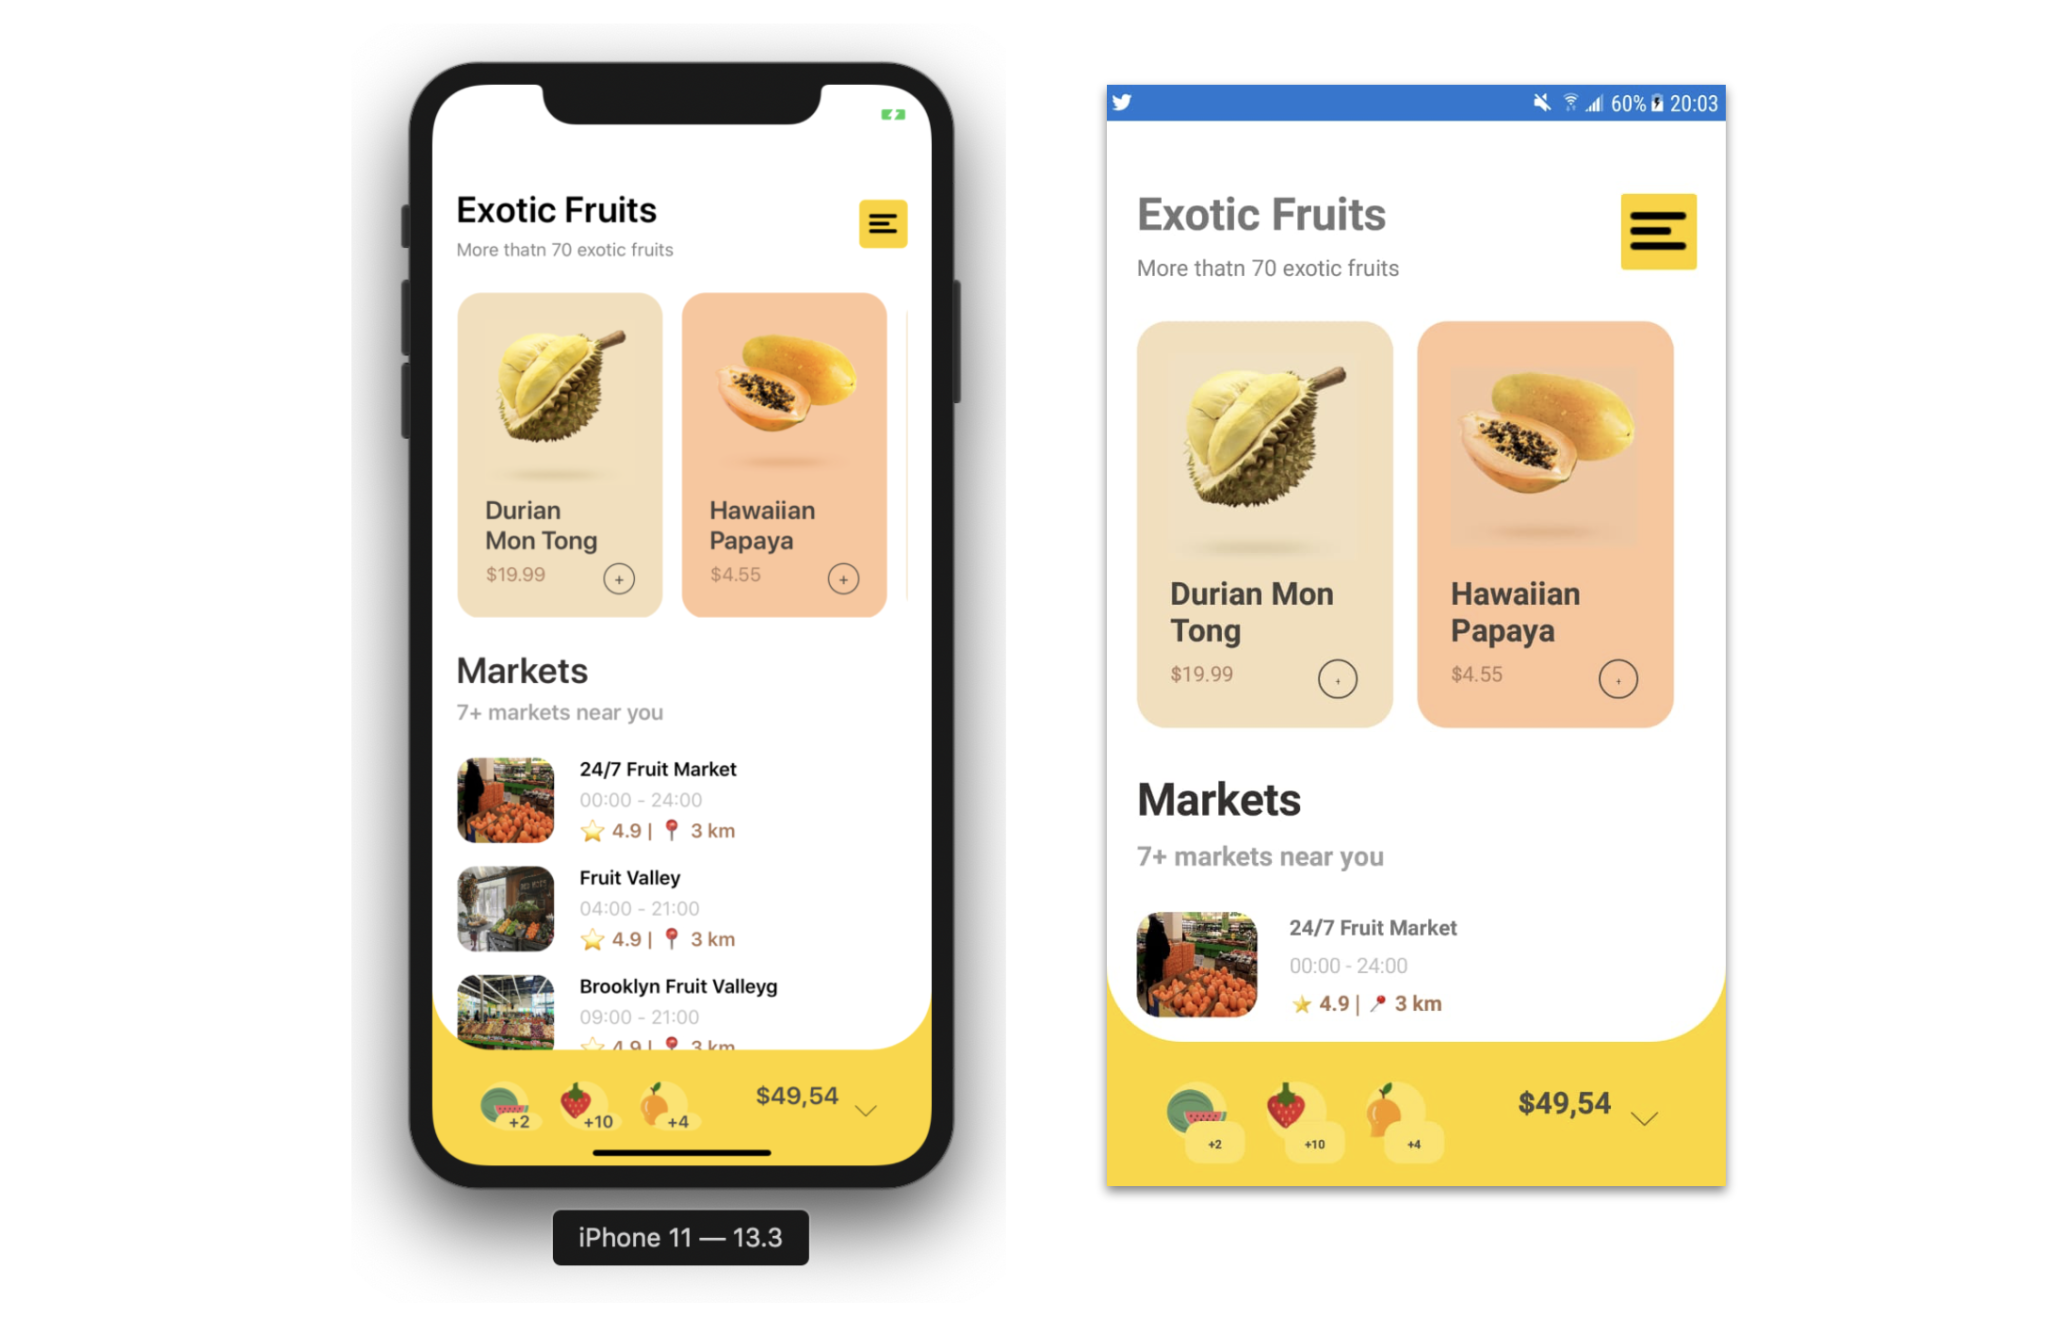 Replicating Exotic Fruits App in Xamarin Forms